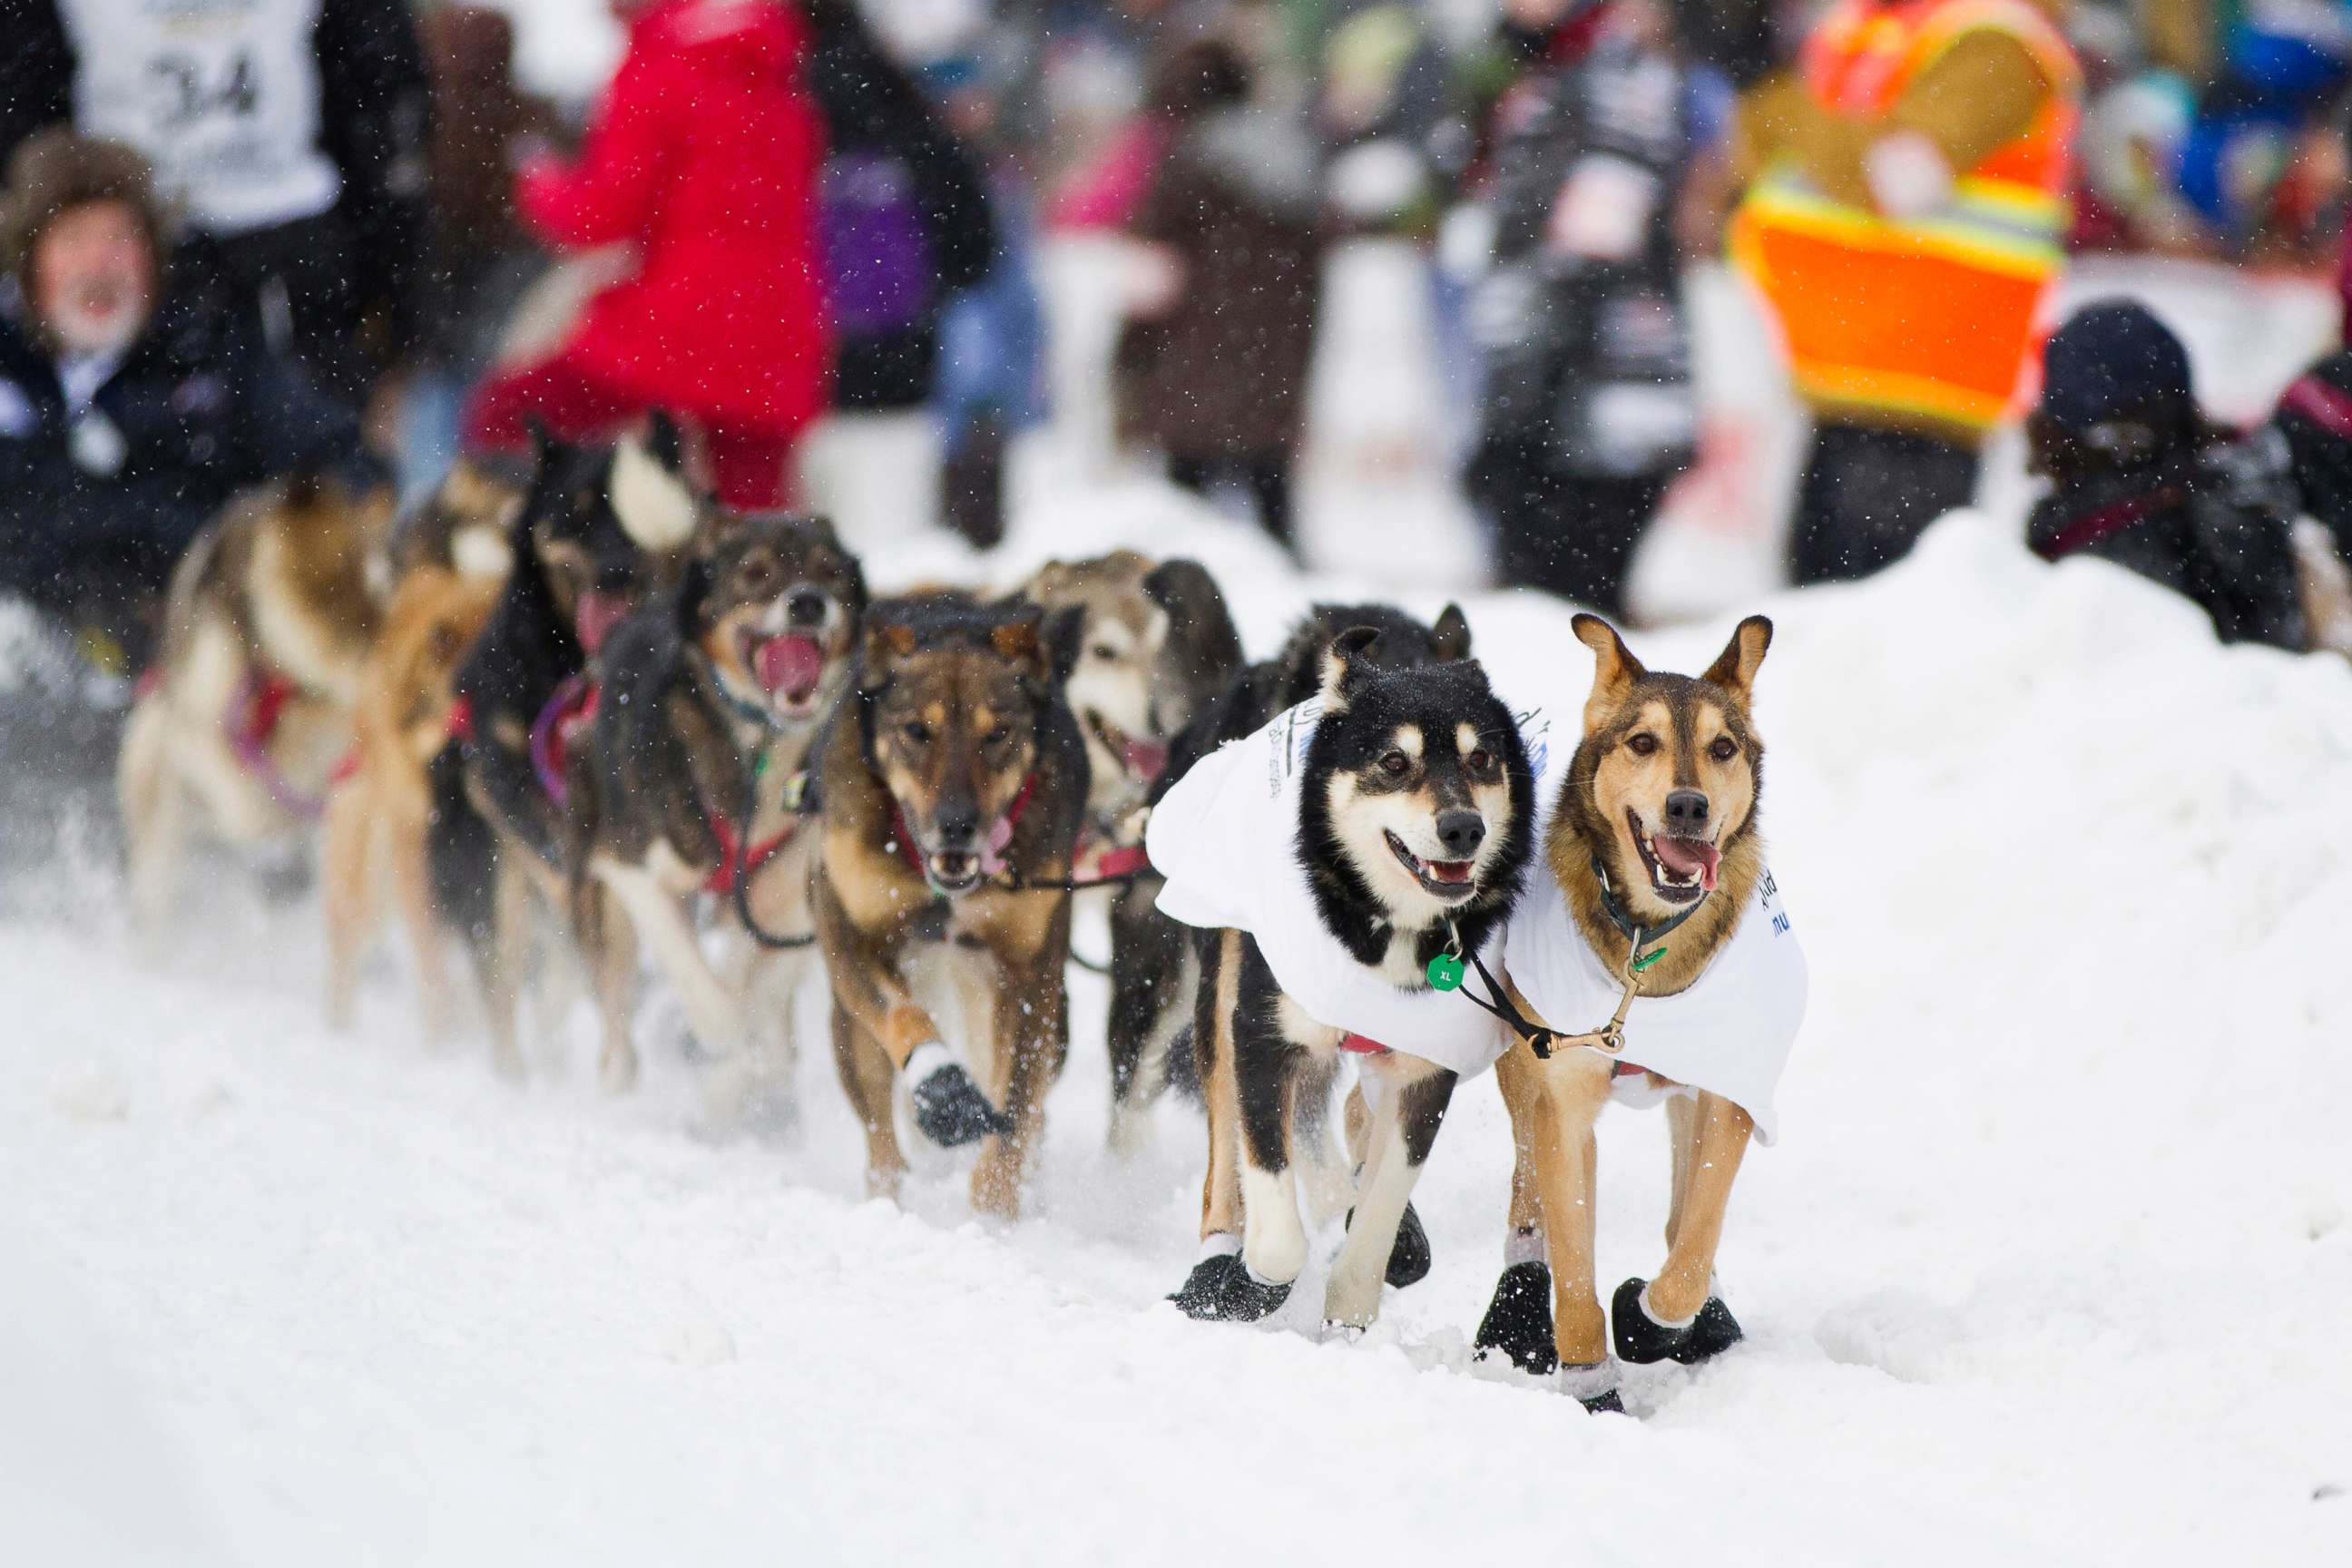 PHOTO: Dallas Seavey's team, from Willow, Alaska, races down the 4th Avenue during the ceremonial start of the 40th Iditarod Trail Sled Dog Race in downtown Anchorage in this March 3, 2012 file photo.